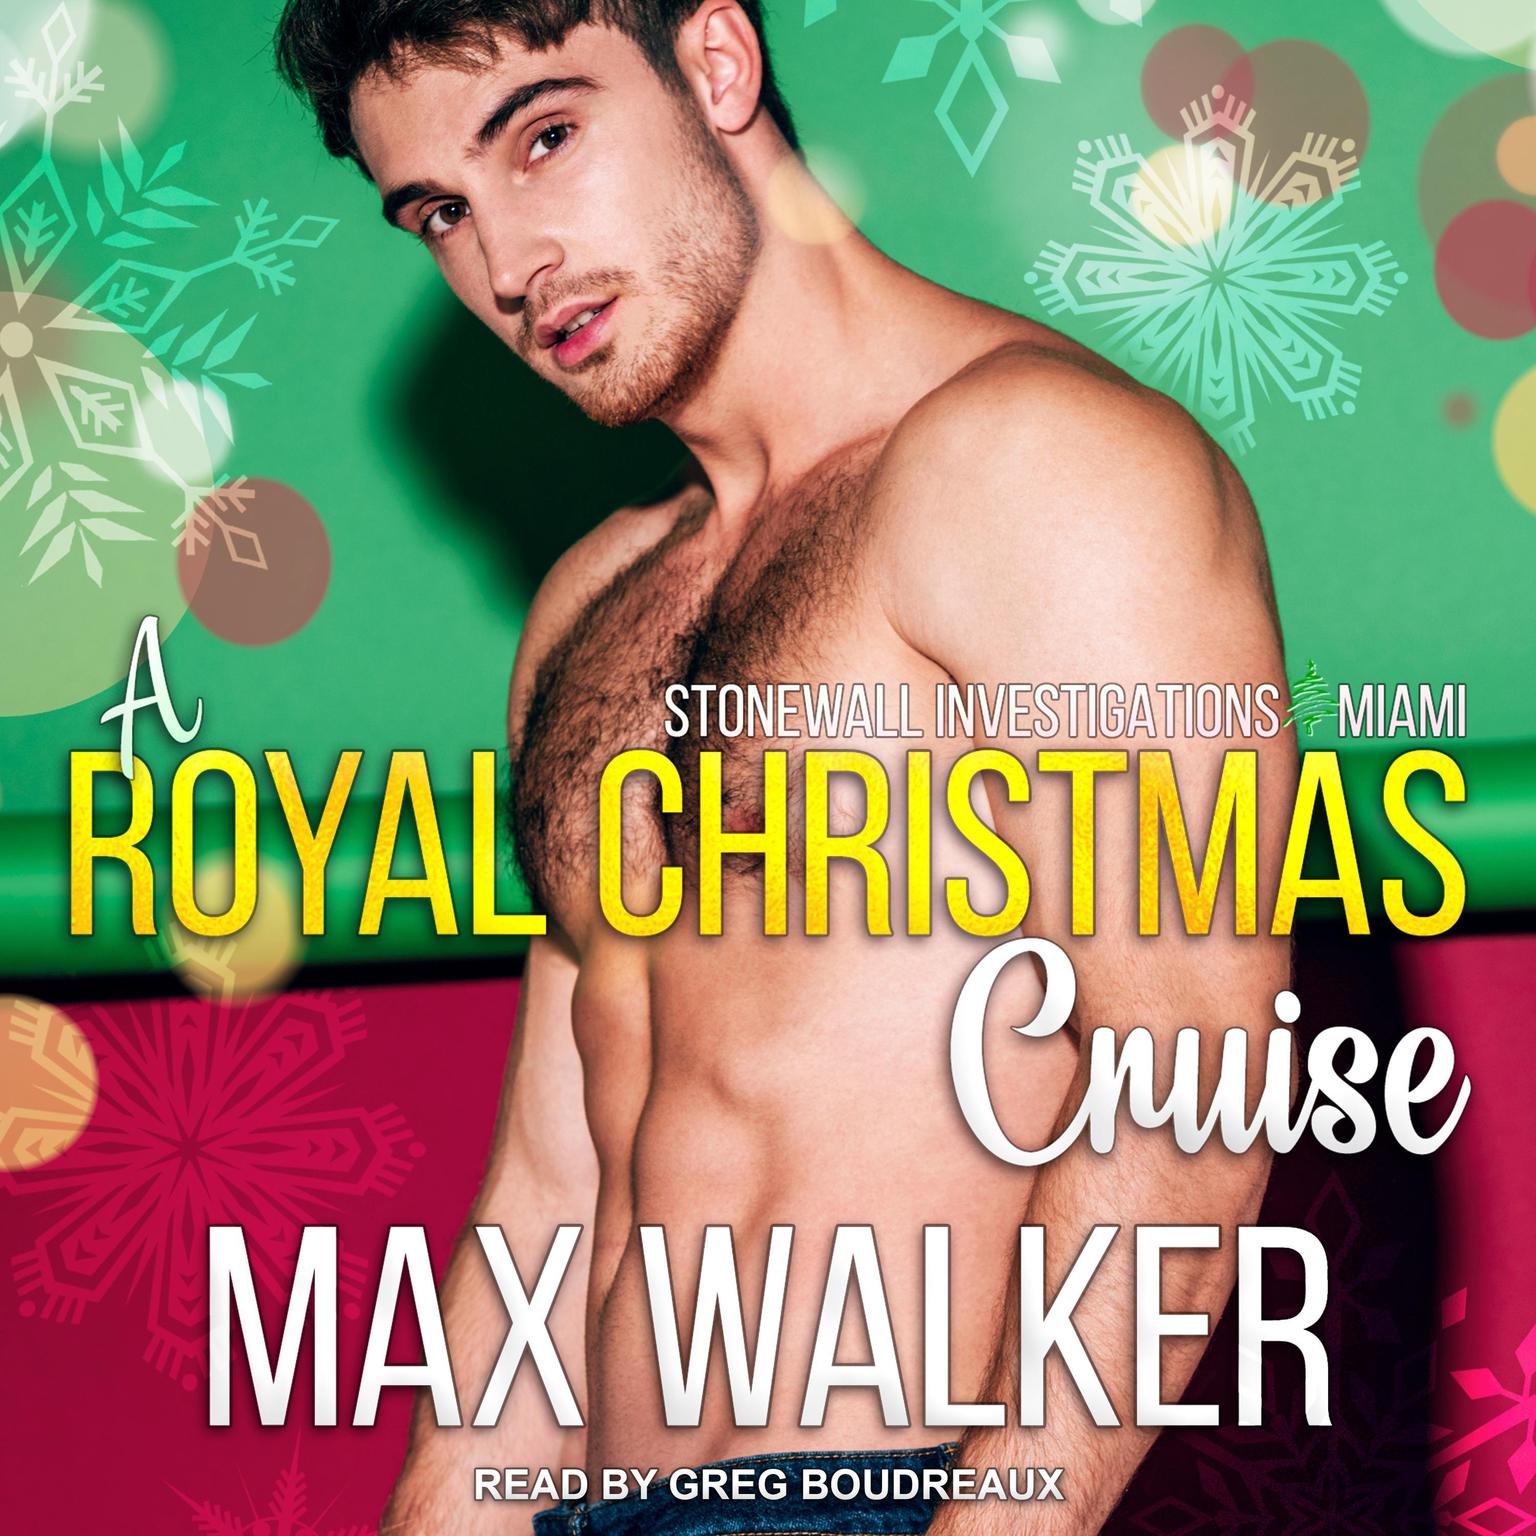 A Royal Christmas Cruise: A Stonewall Investigations - Miami Holiday Story Audiobook, by Max Walker